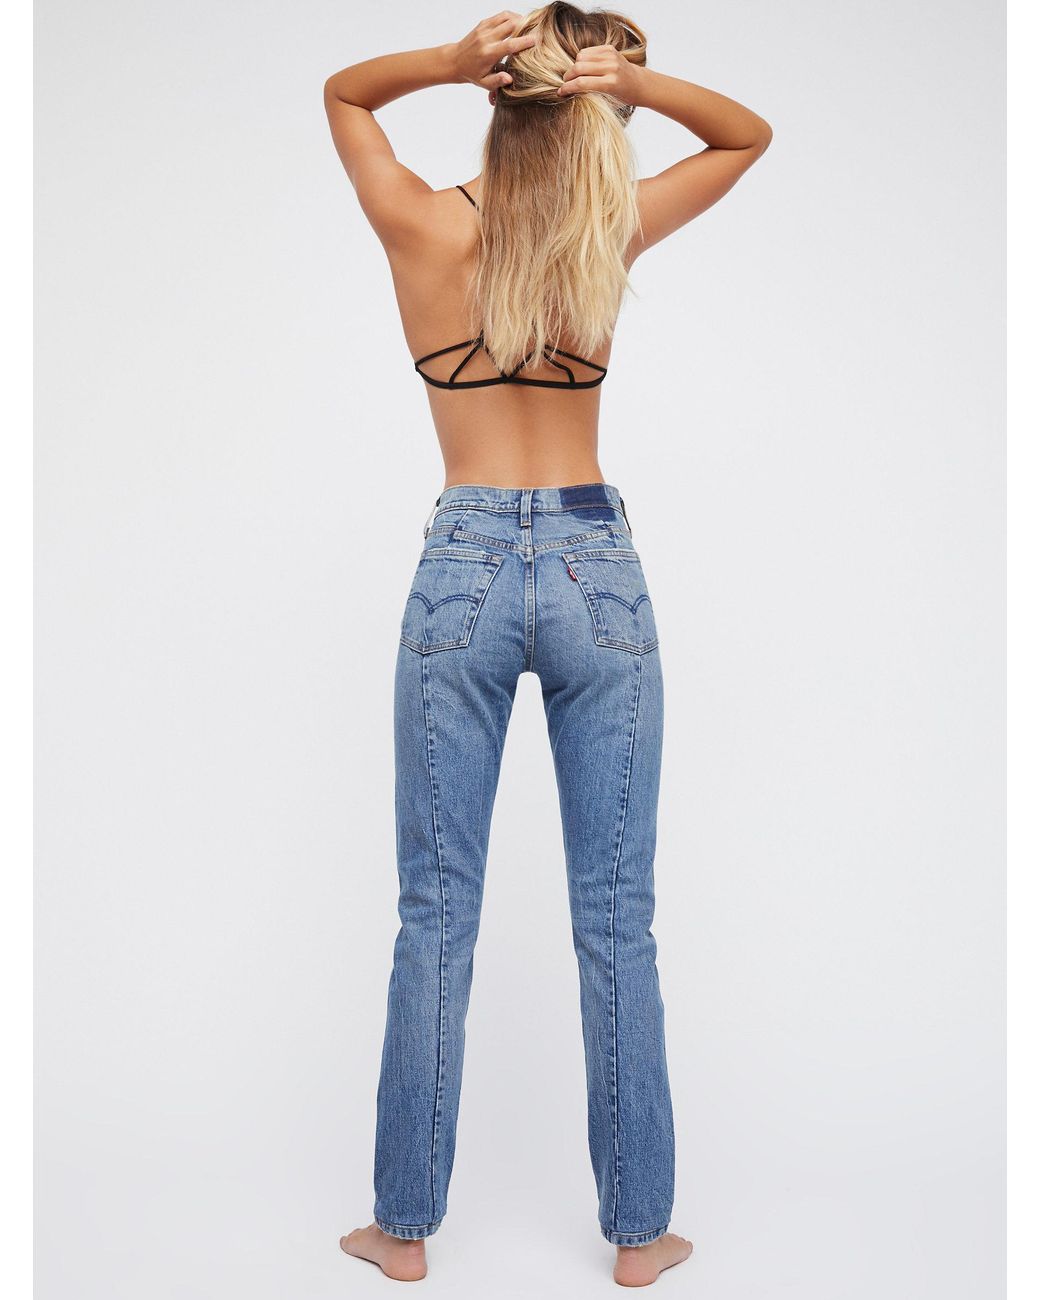 Free People Levi's 501 Skinny Altered Jeans in Blue | Lyst